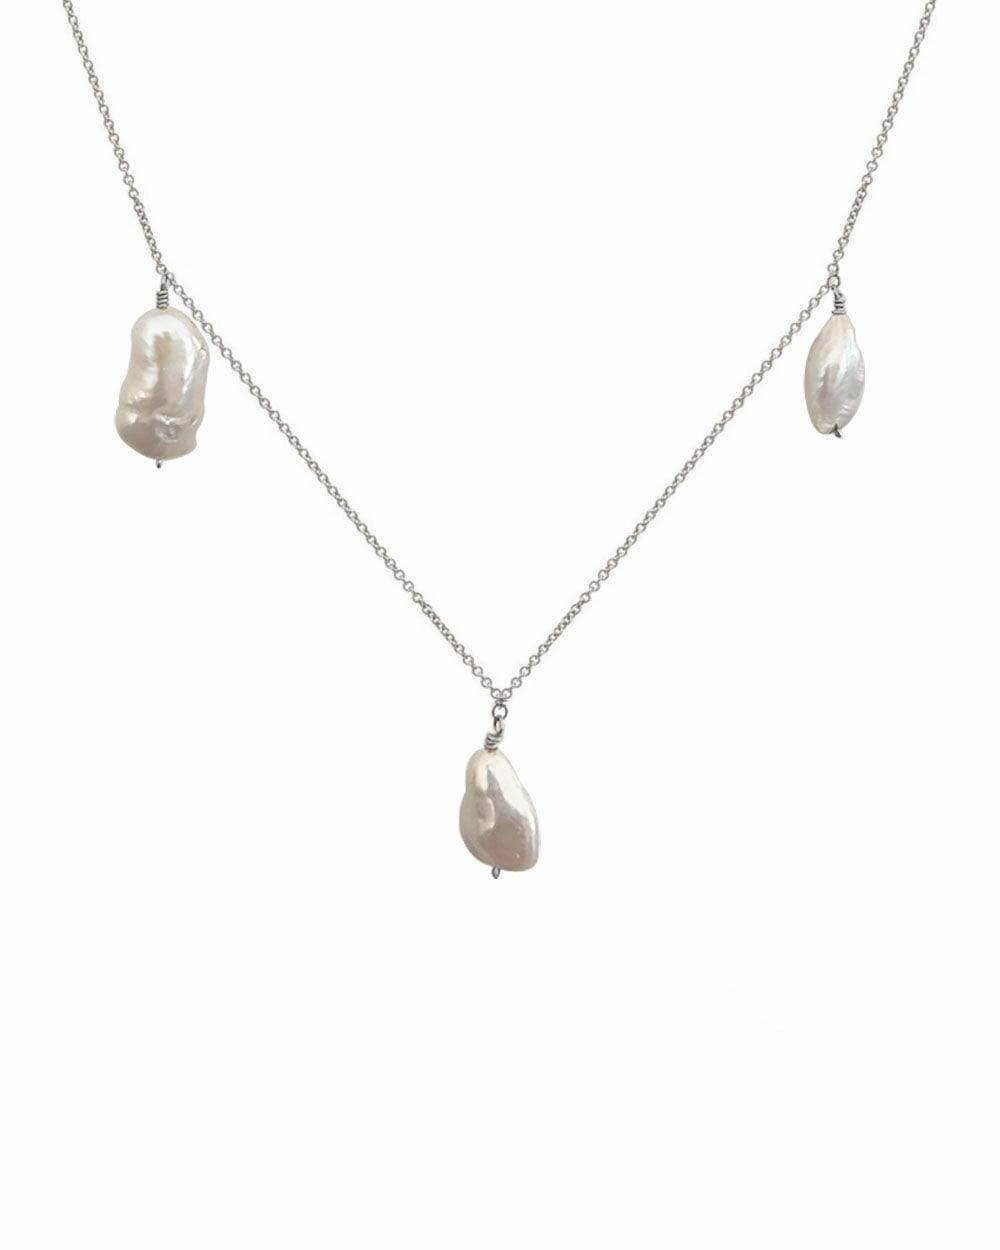 Hannah Everly Pearl Necklace